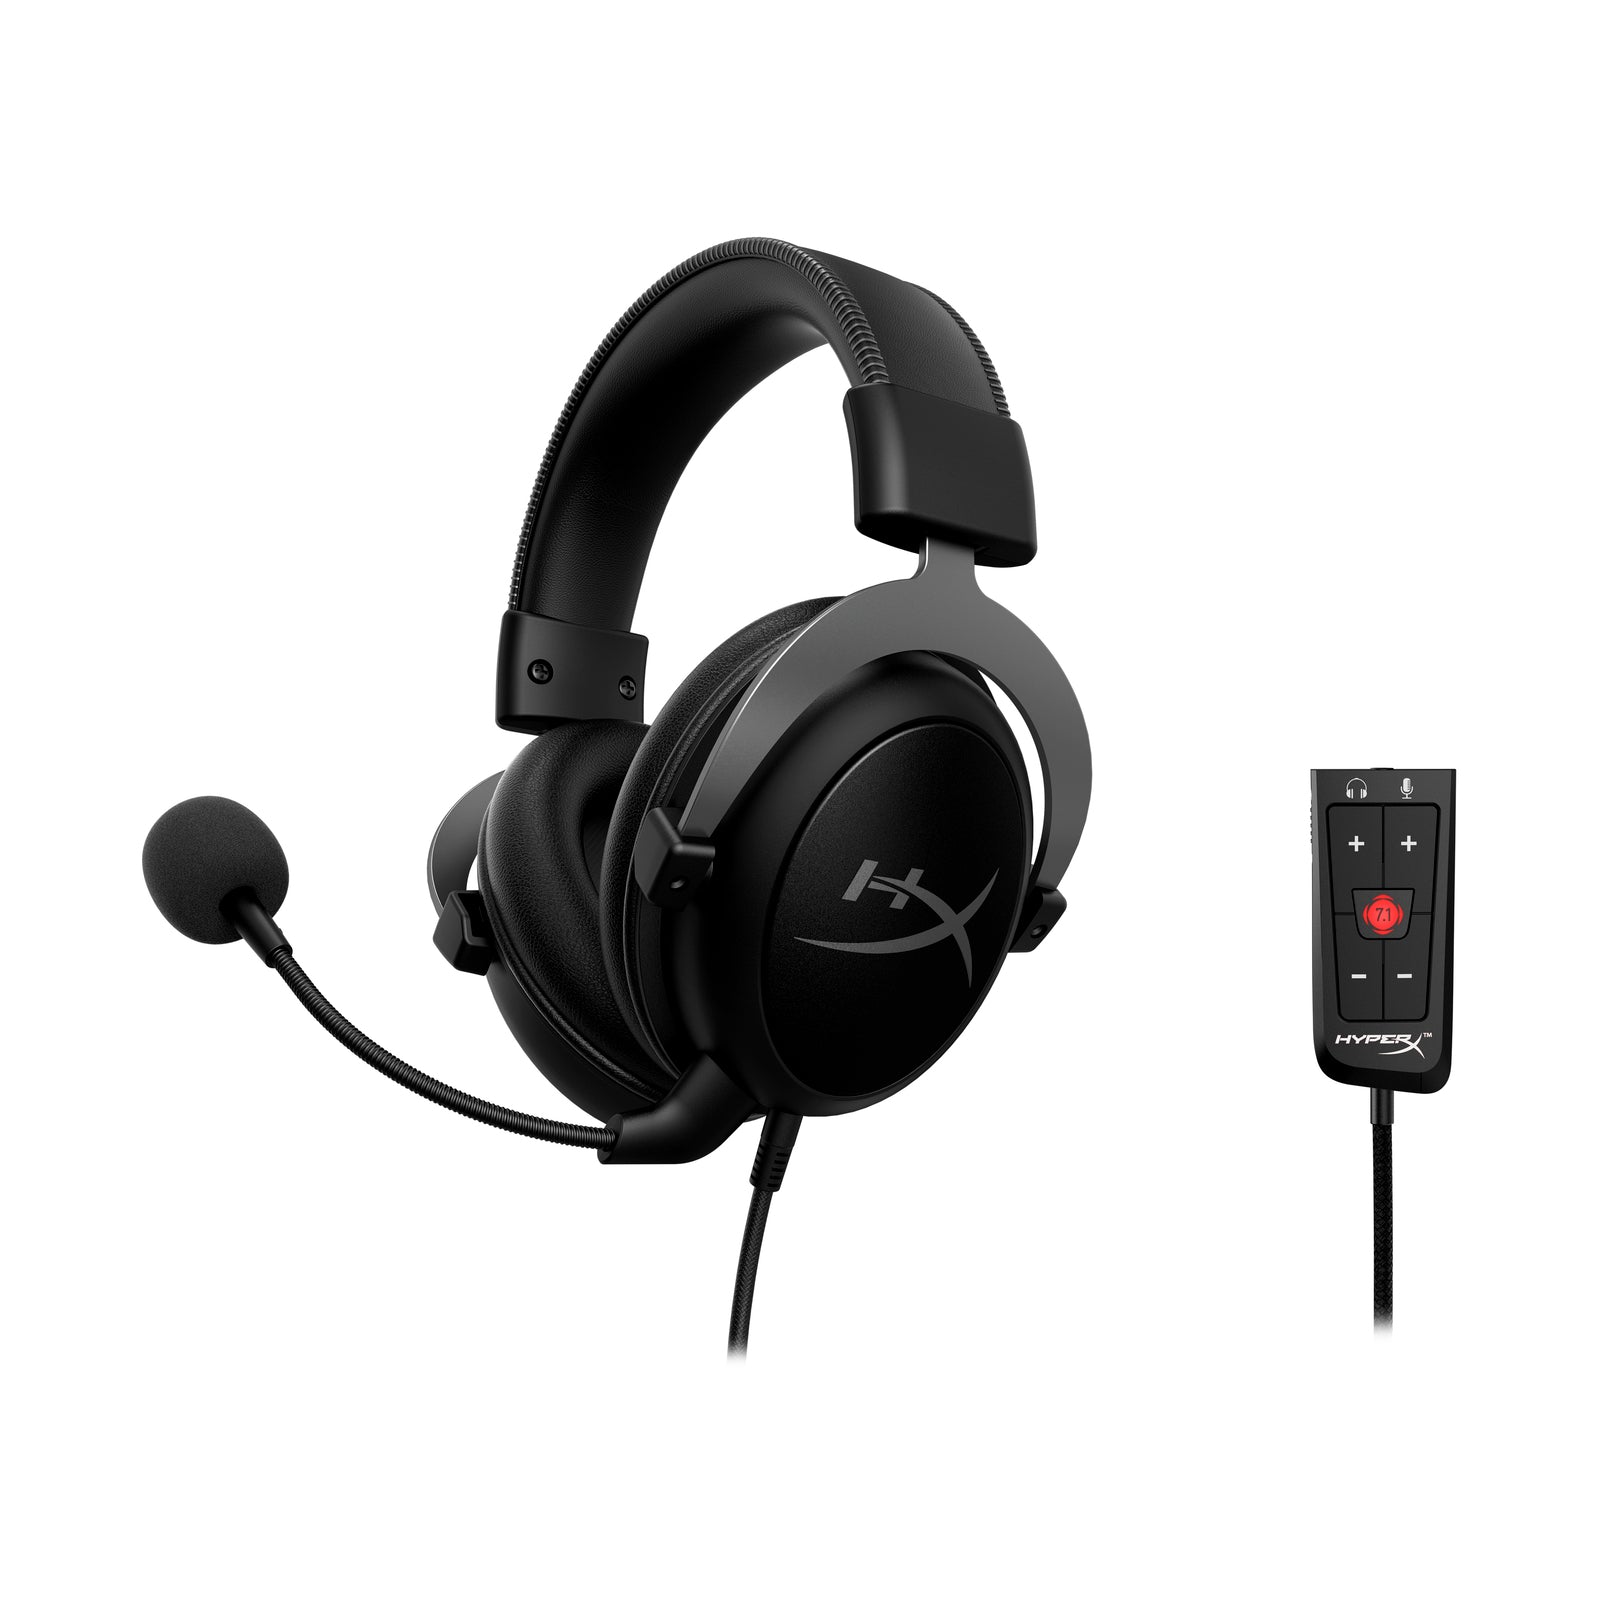 HyperX Cloud II gun metal gaming headset displaying the front left hand side featuring the detachable noise cancelling microphone and USB advanced audio control box